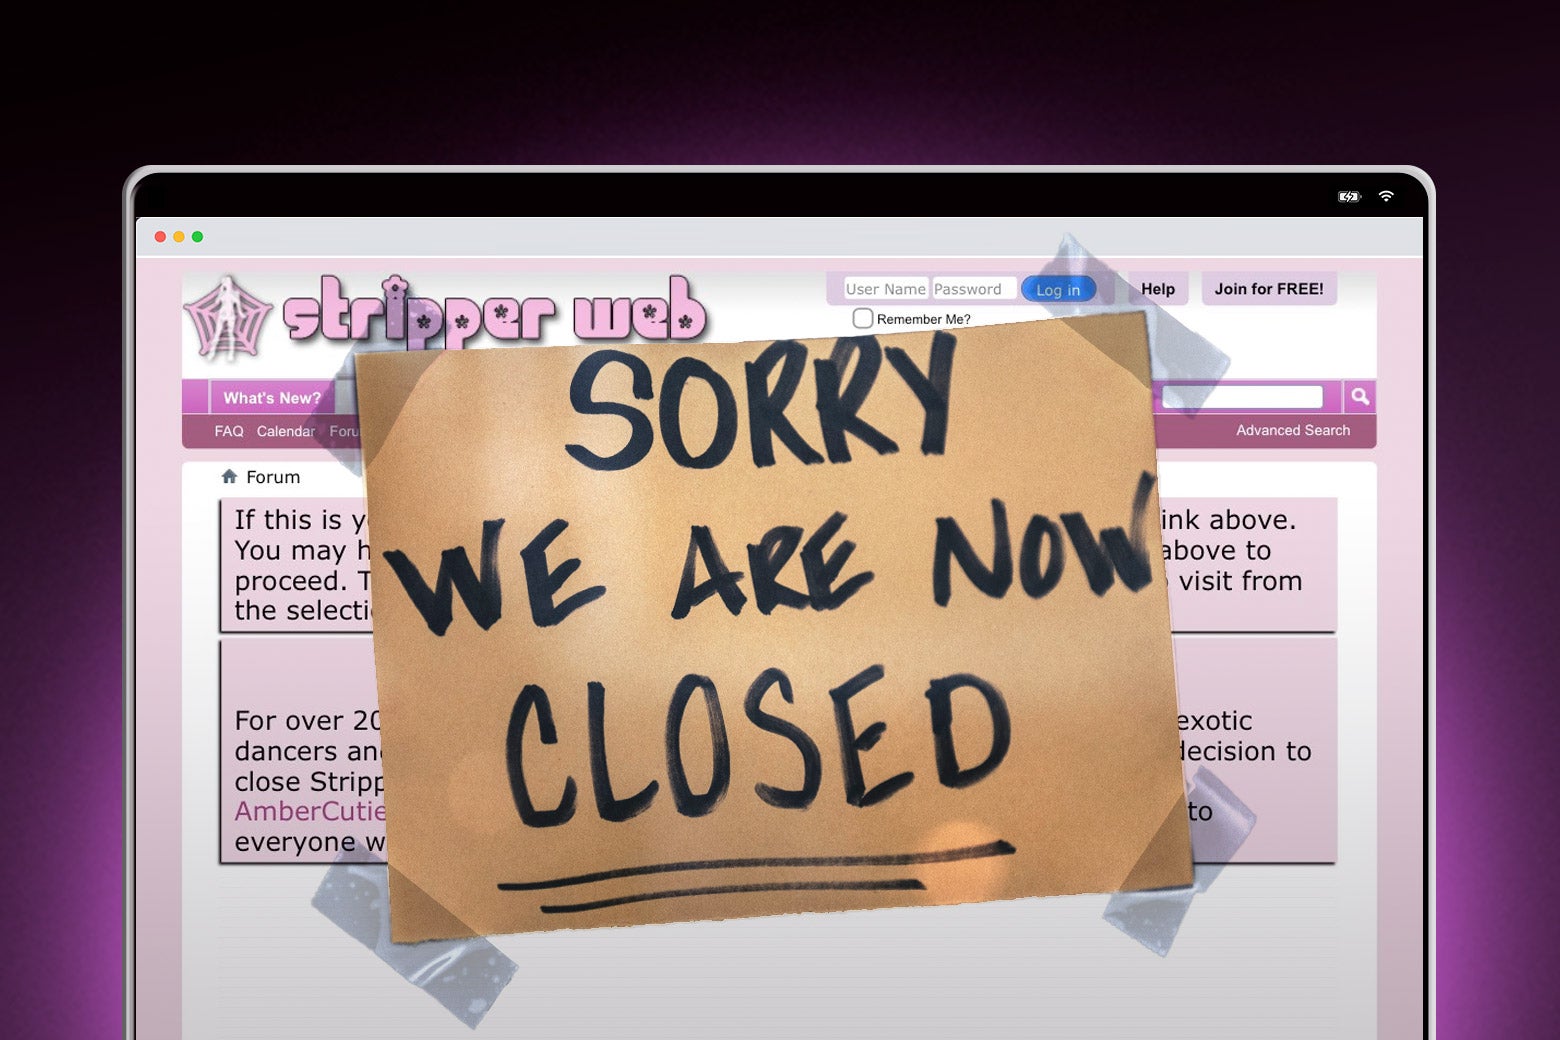 A closed sign is placed over the Stripperweb homepage. 